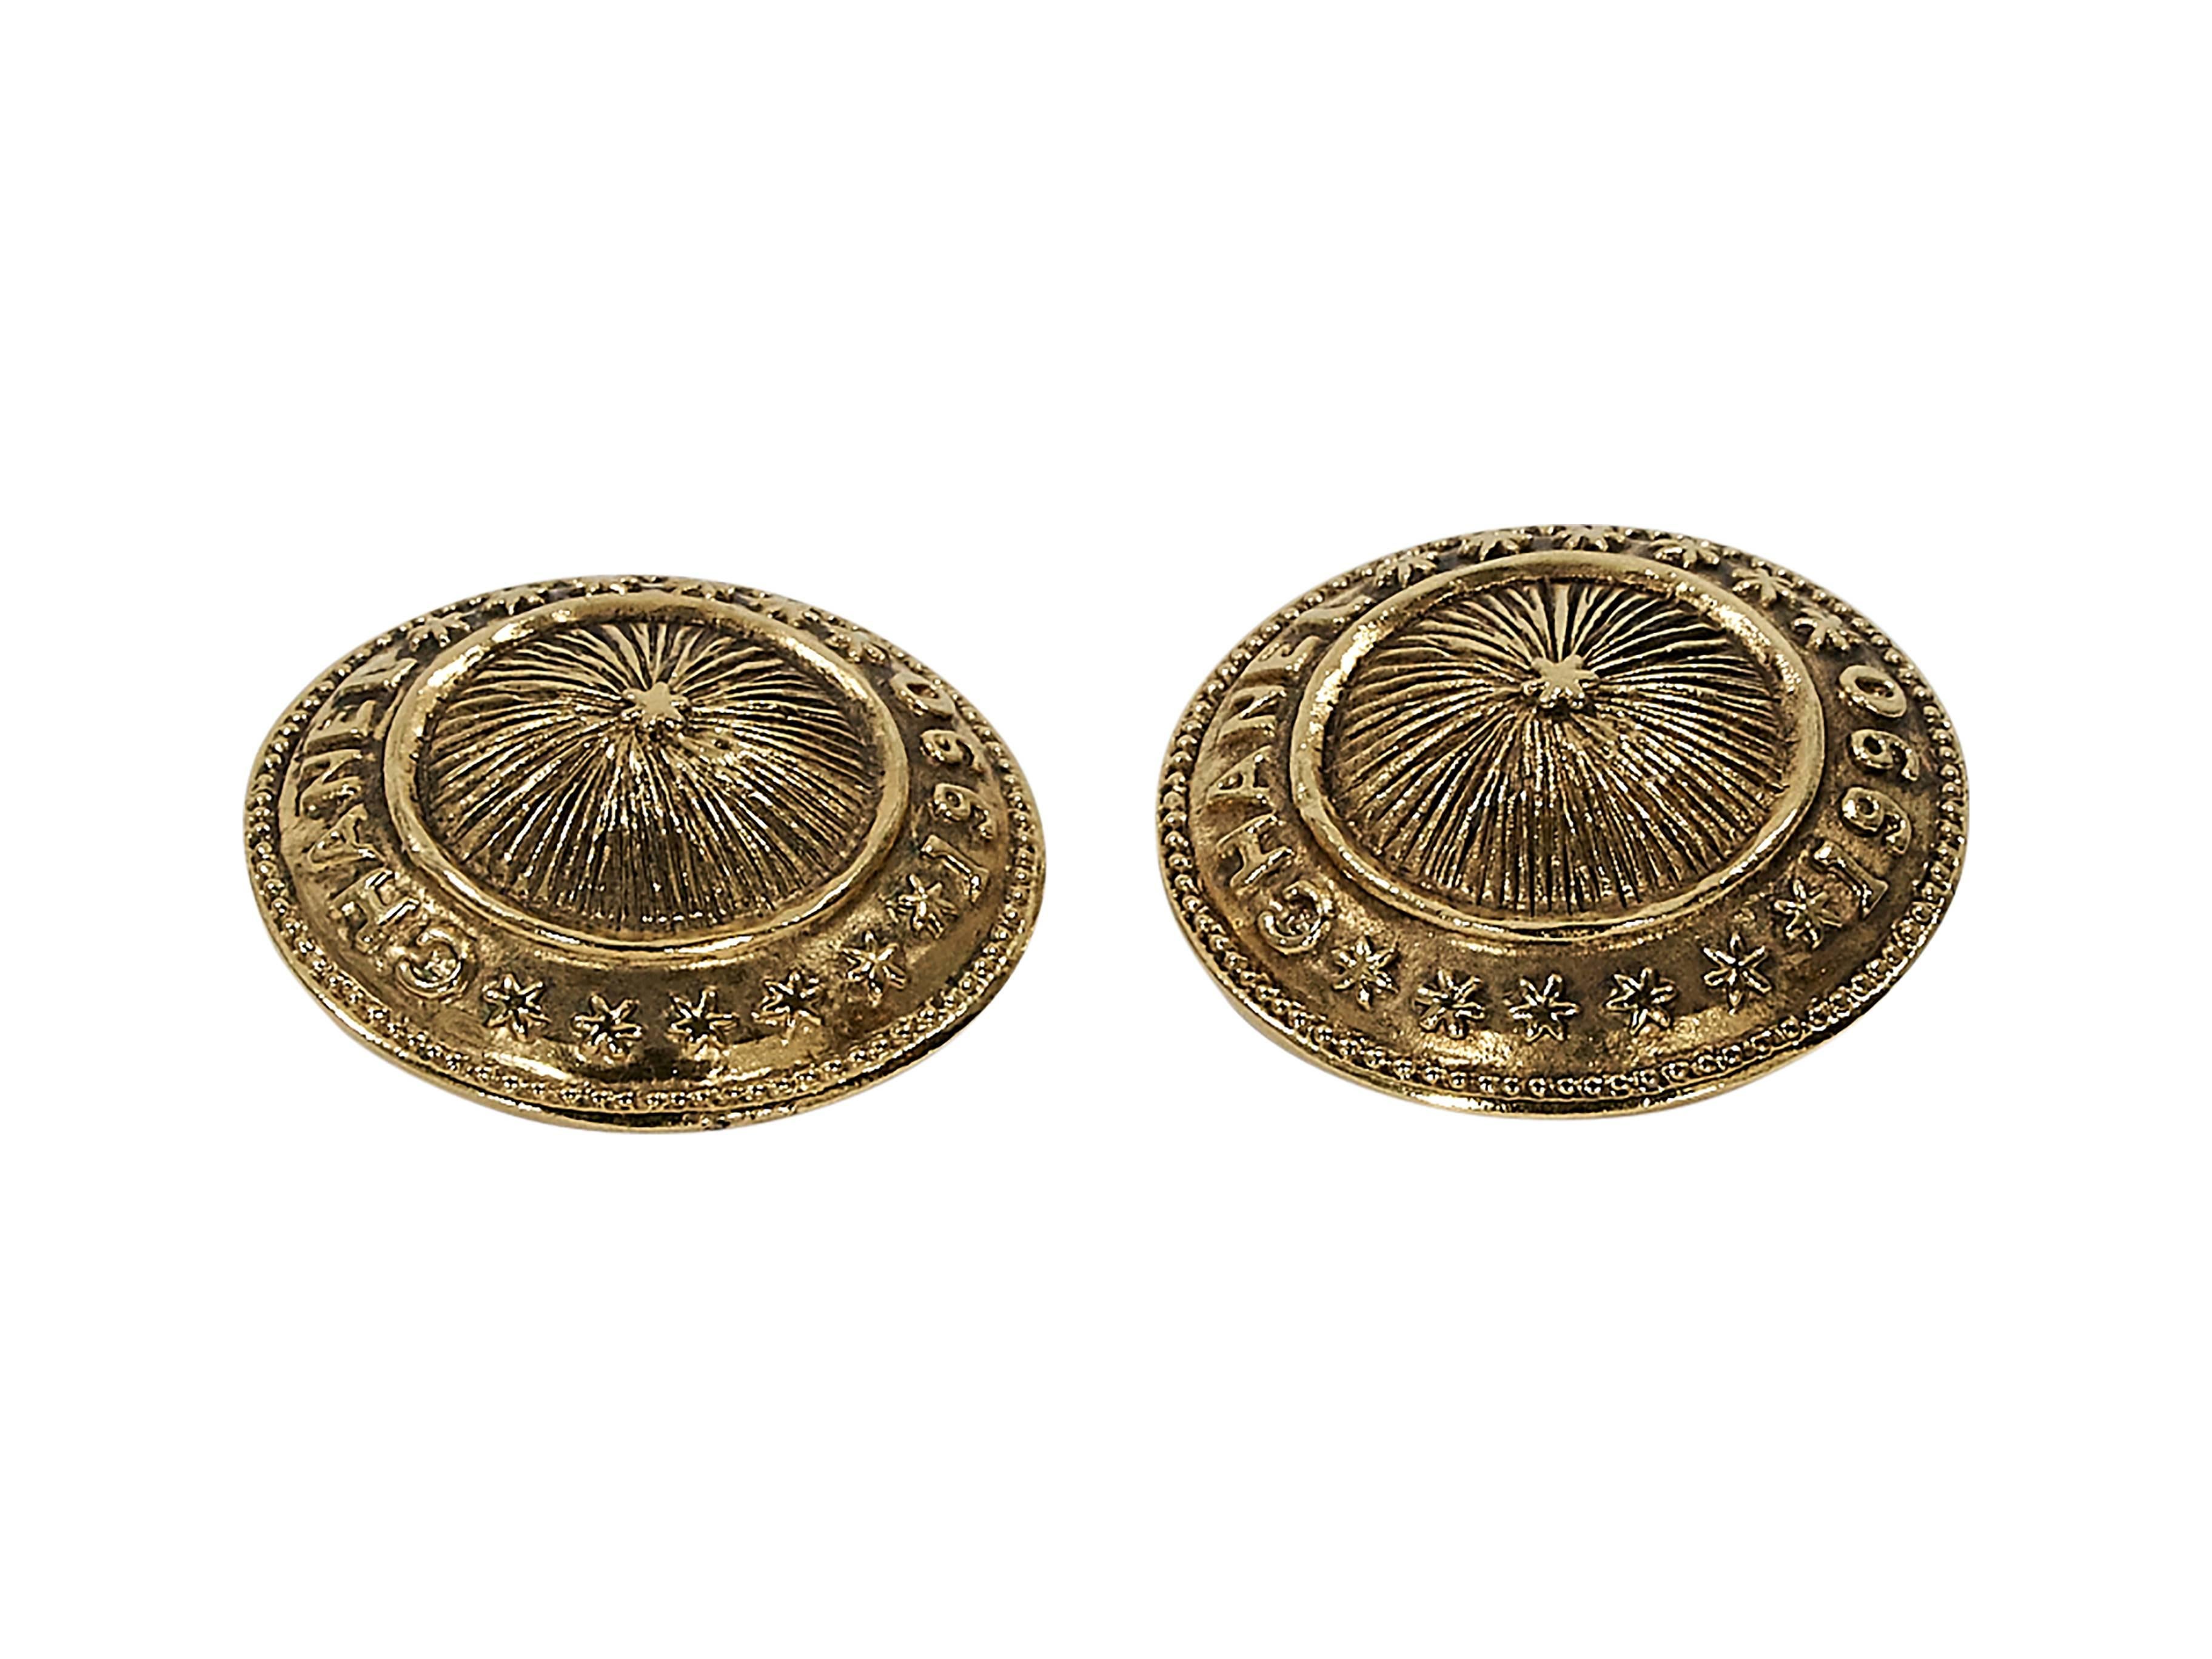 Product details:  Vintage goldtone 1990 earrings by Chanel.  Clip-on backings.  1.25